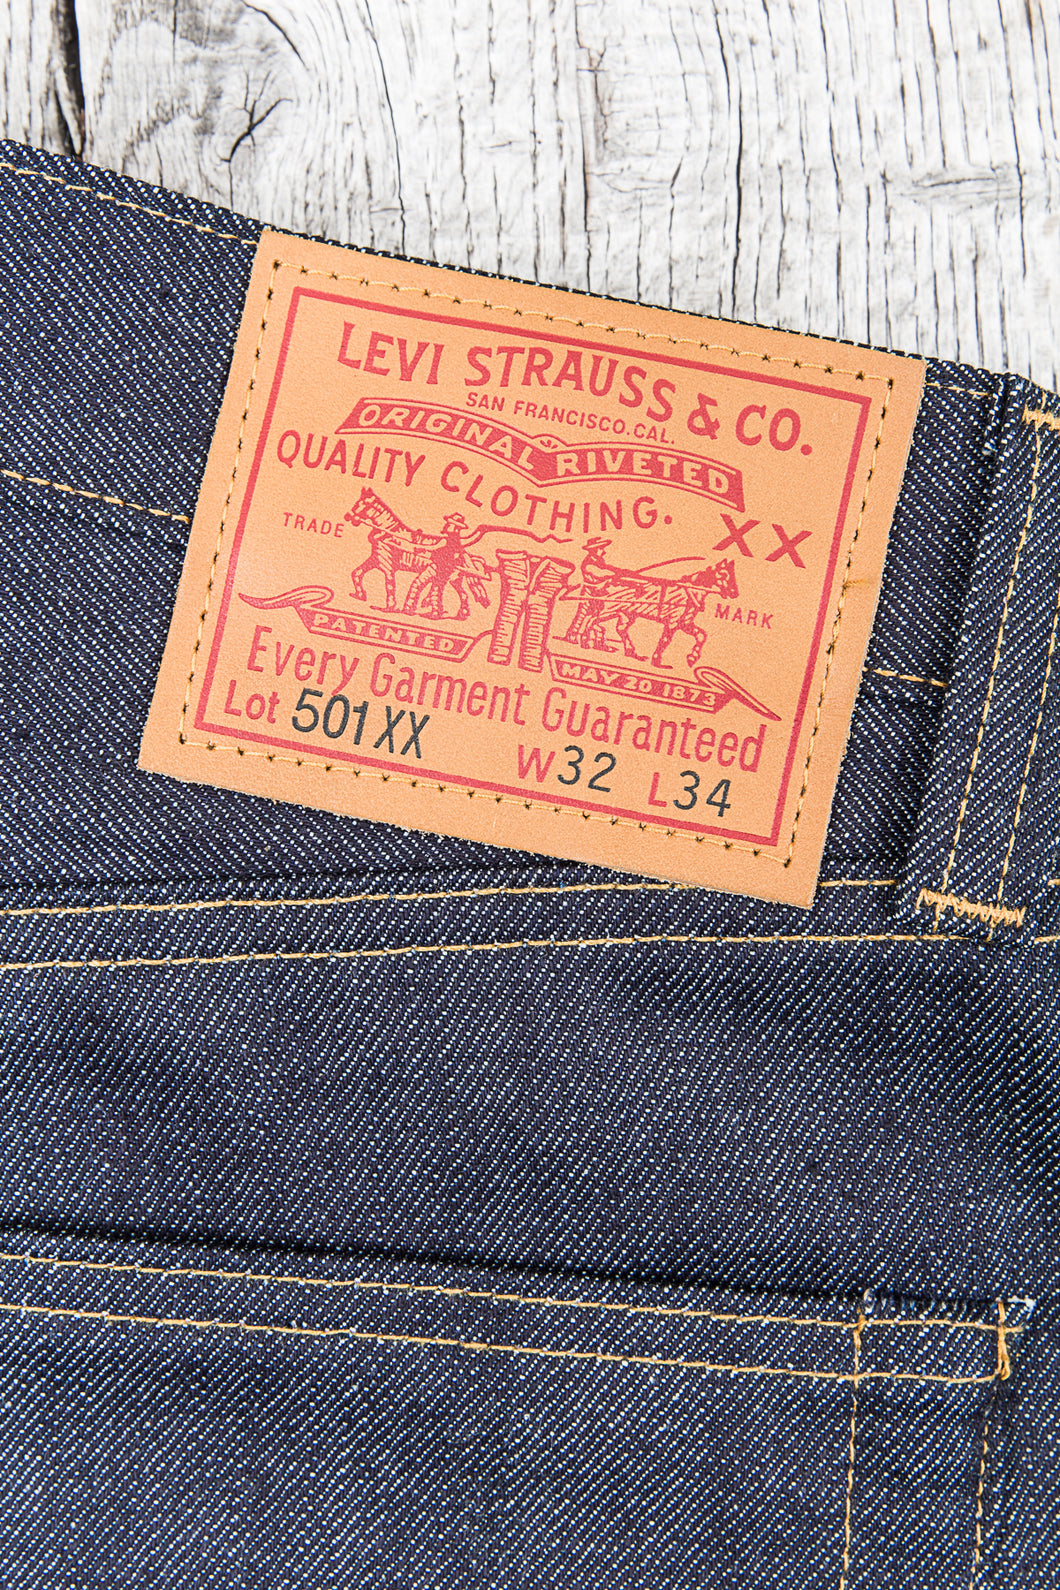 LVC LEVI'S Vintage Clothing 501xx 1947 (Made in USA) Cone mill